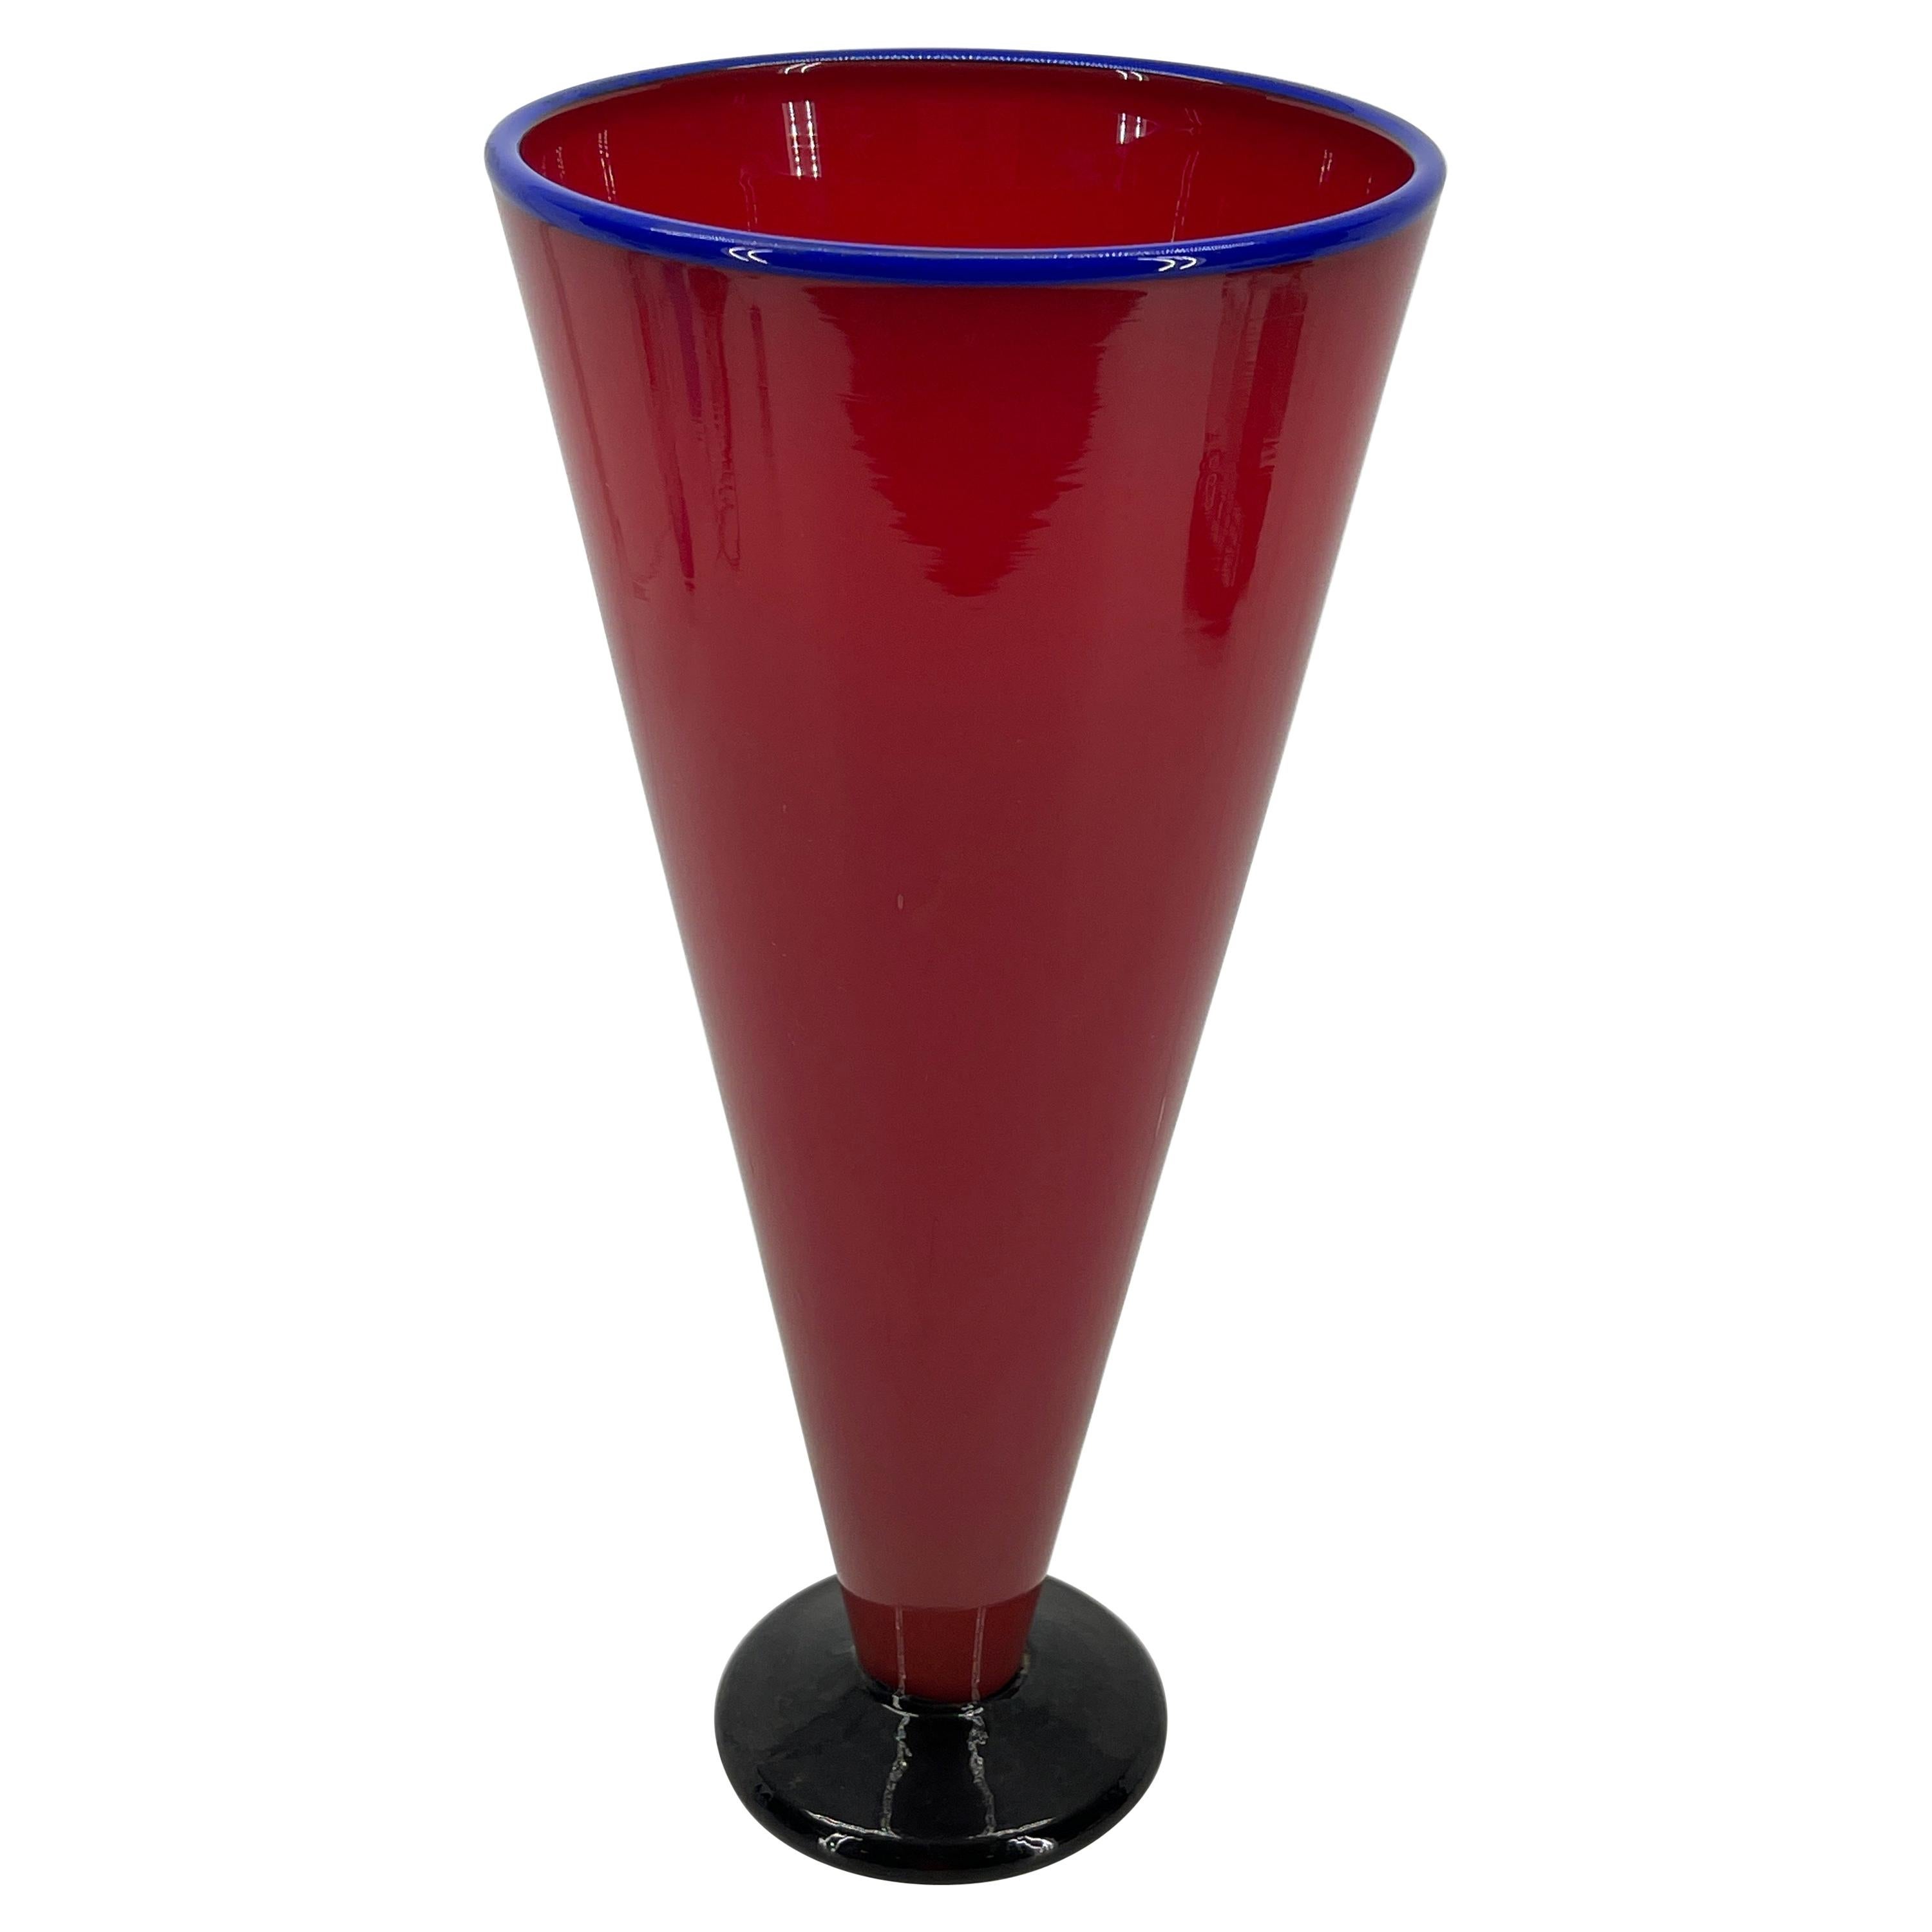 Tall Red and Blue Handblown Glass Vase, Modern